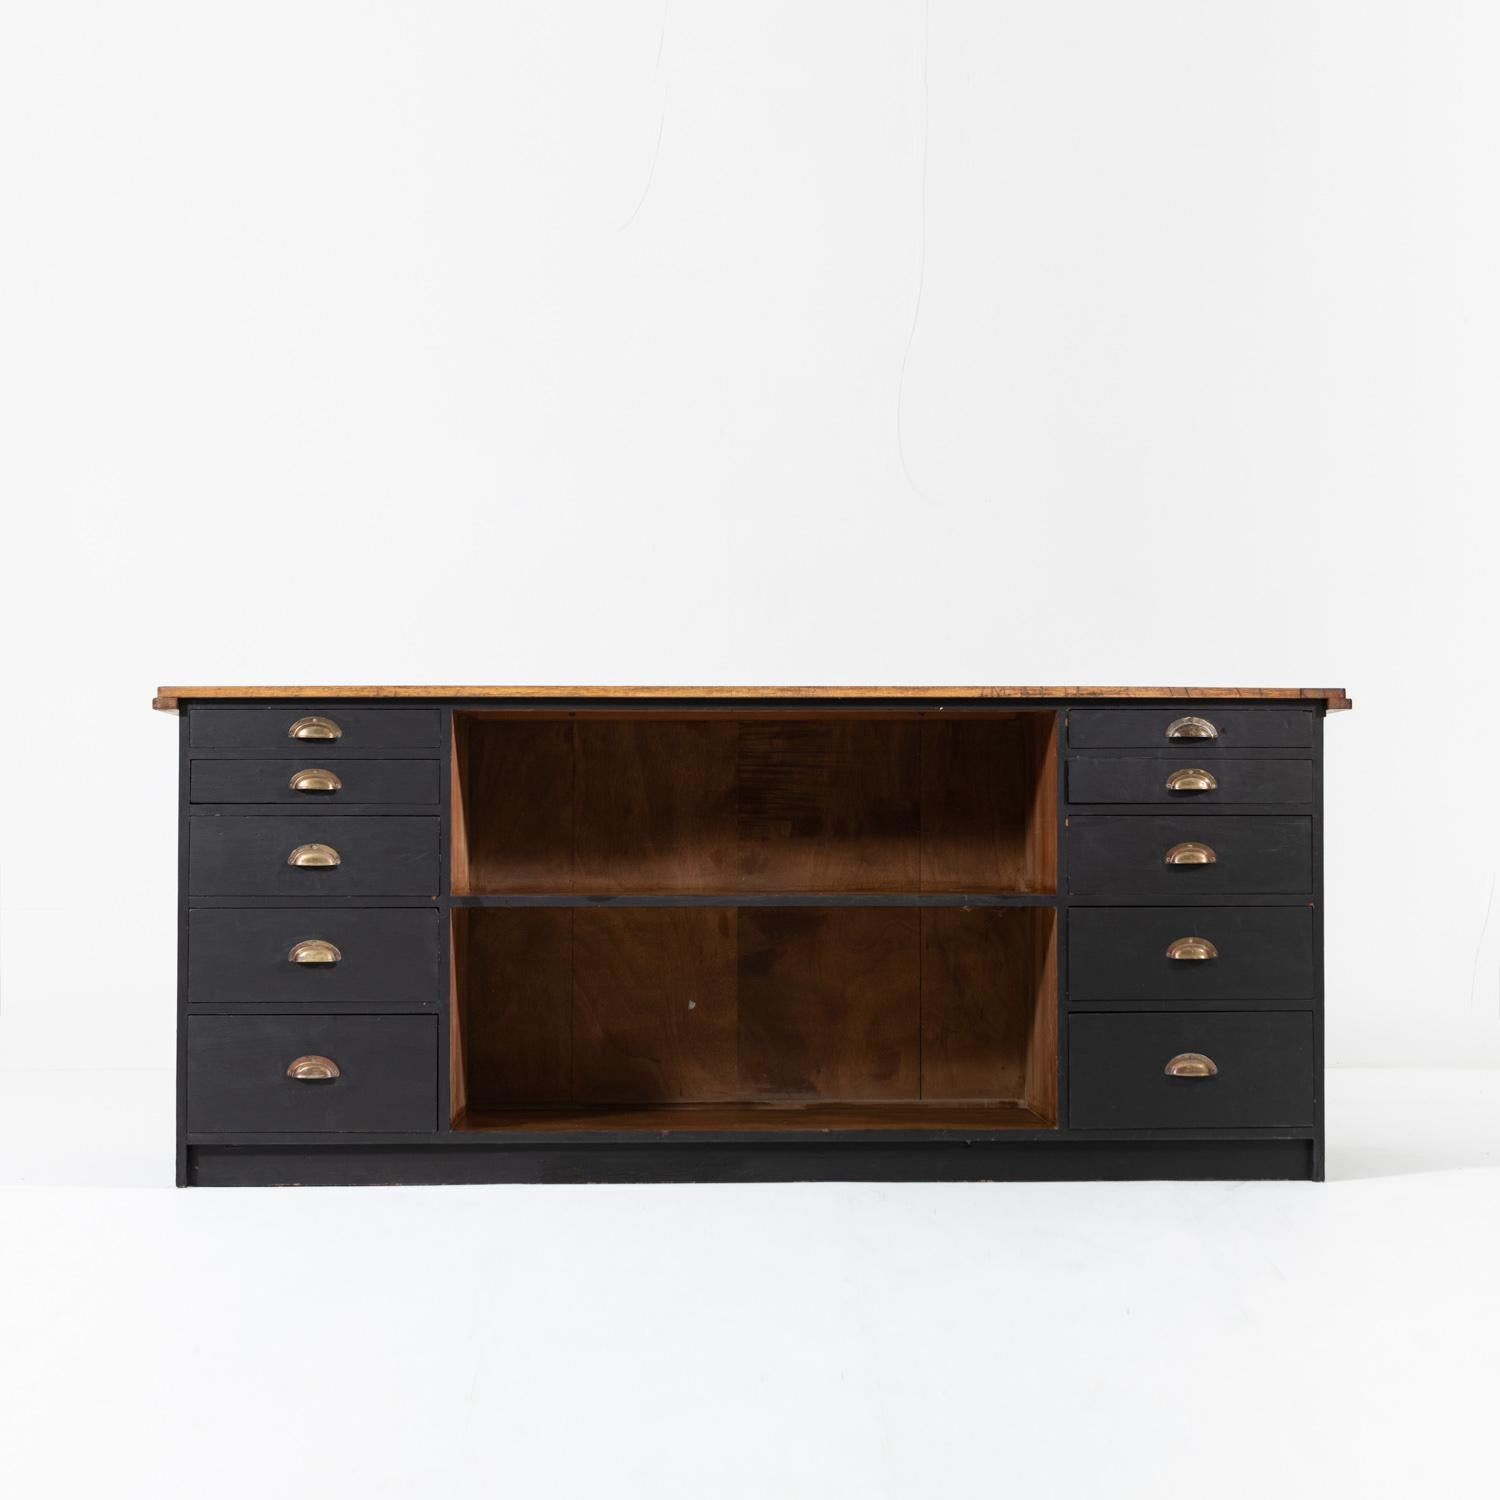 Sturdy midcentury double sided painted oak shop counter.

The piece has abundant storage with sliding glass doors opening to shelves at the front, whilst the back has two banks of five drawers on either side of a large open shelf.

This piece